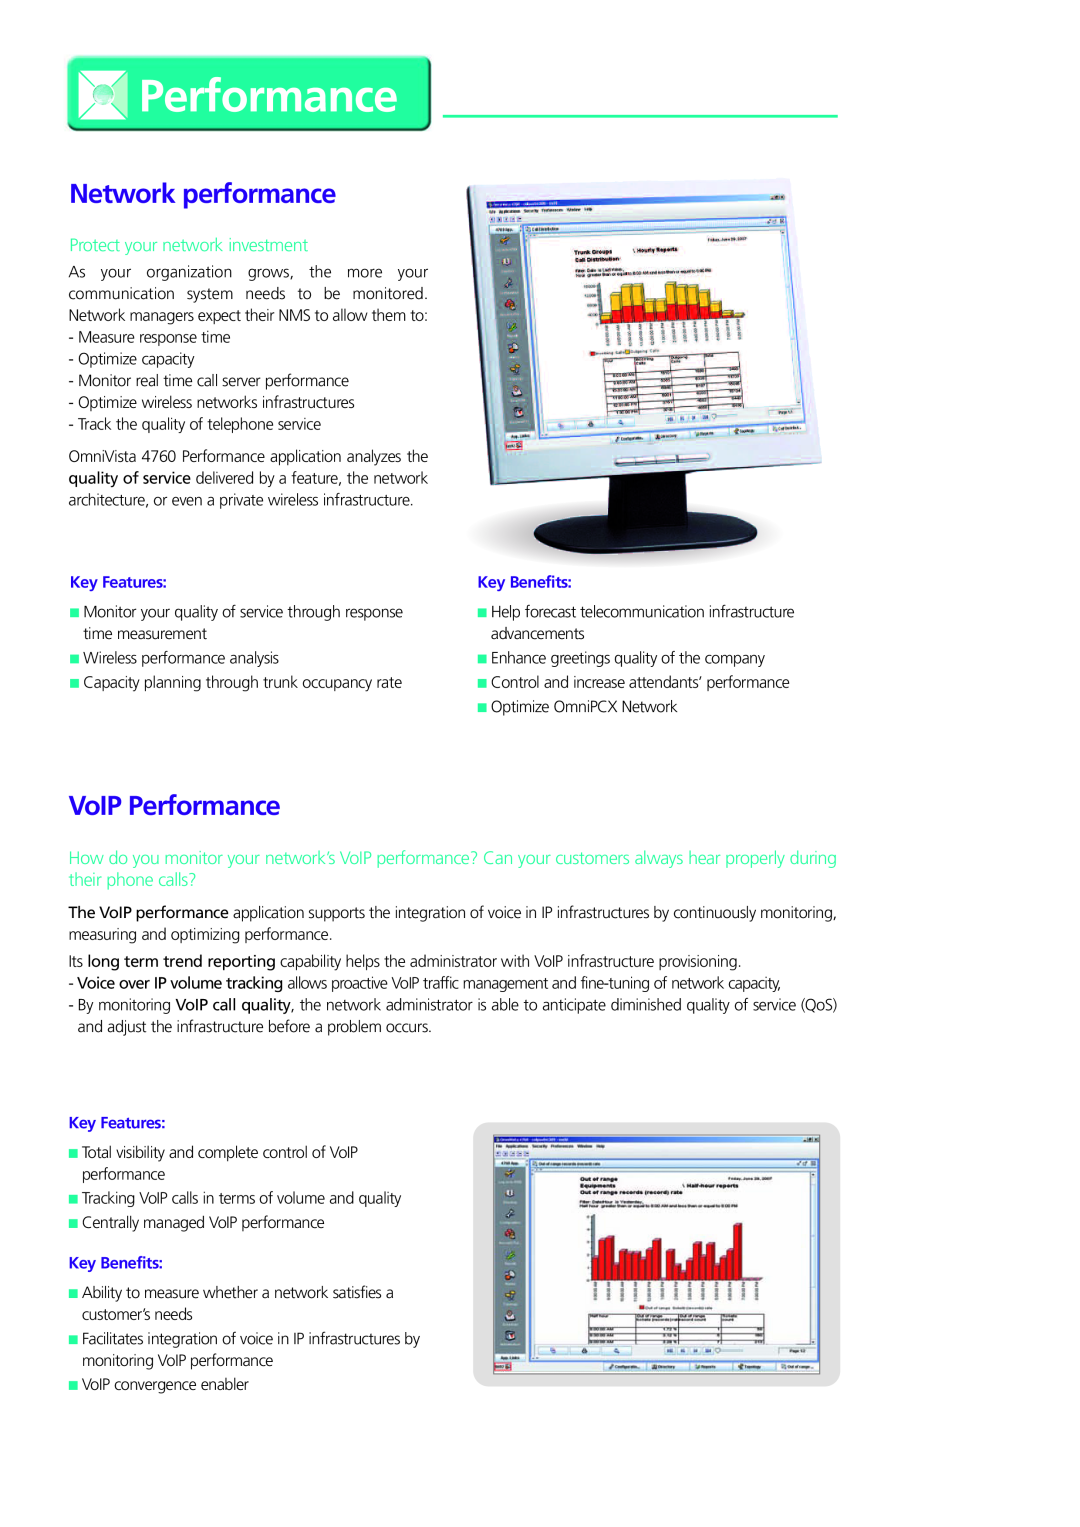 Alcatel-Lucent 4760 manual Network performance, VoIP Performance, Key Features, Key Benefits 